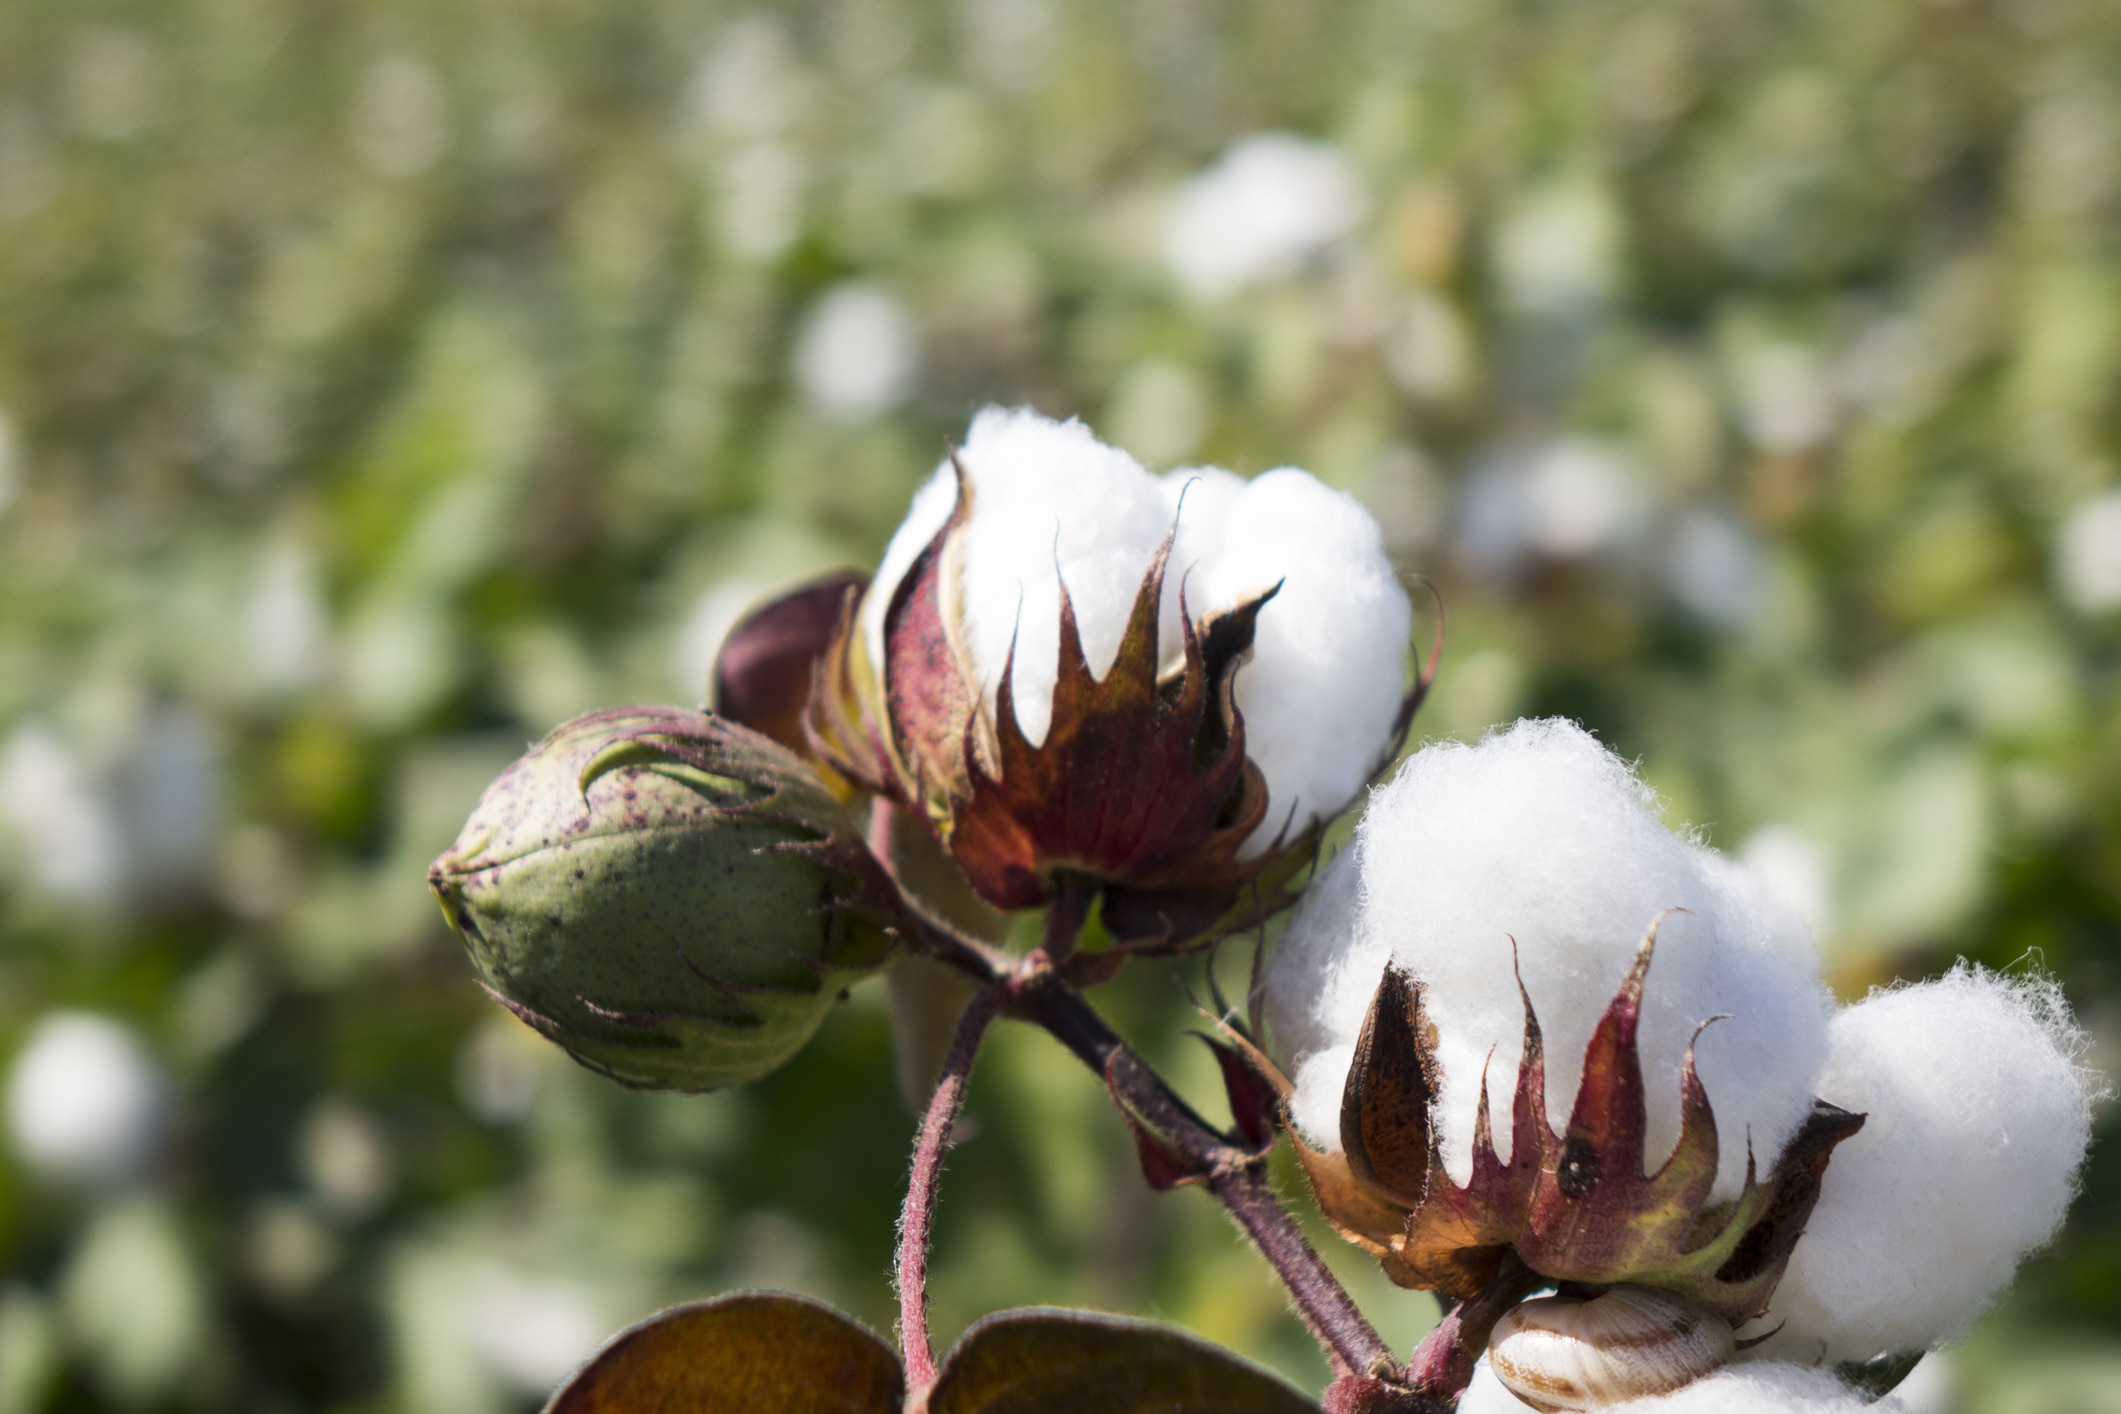 A close-up view of a healthy cotton plant with bolls of fluffy white cotton in the center, standing tall against a blurred background of a vast cotton field.